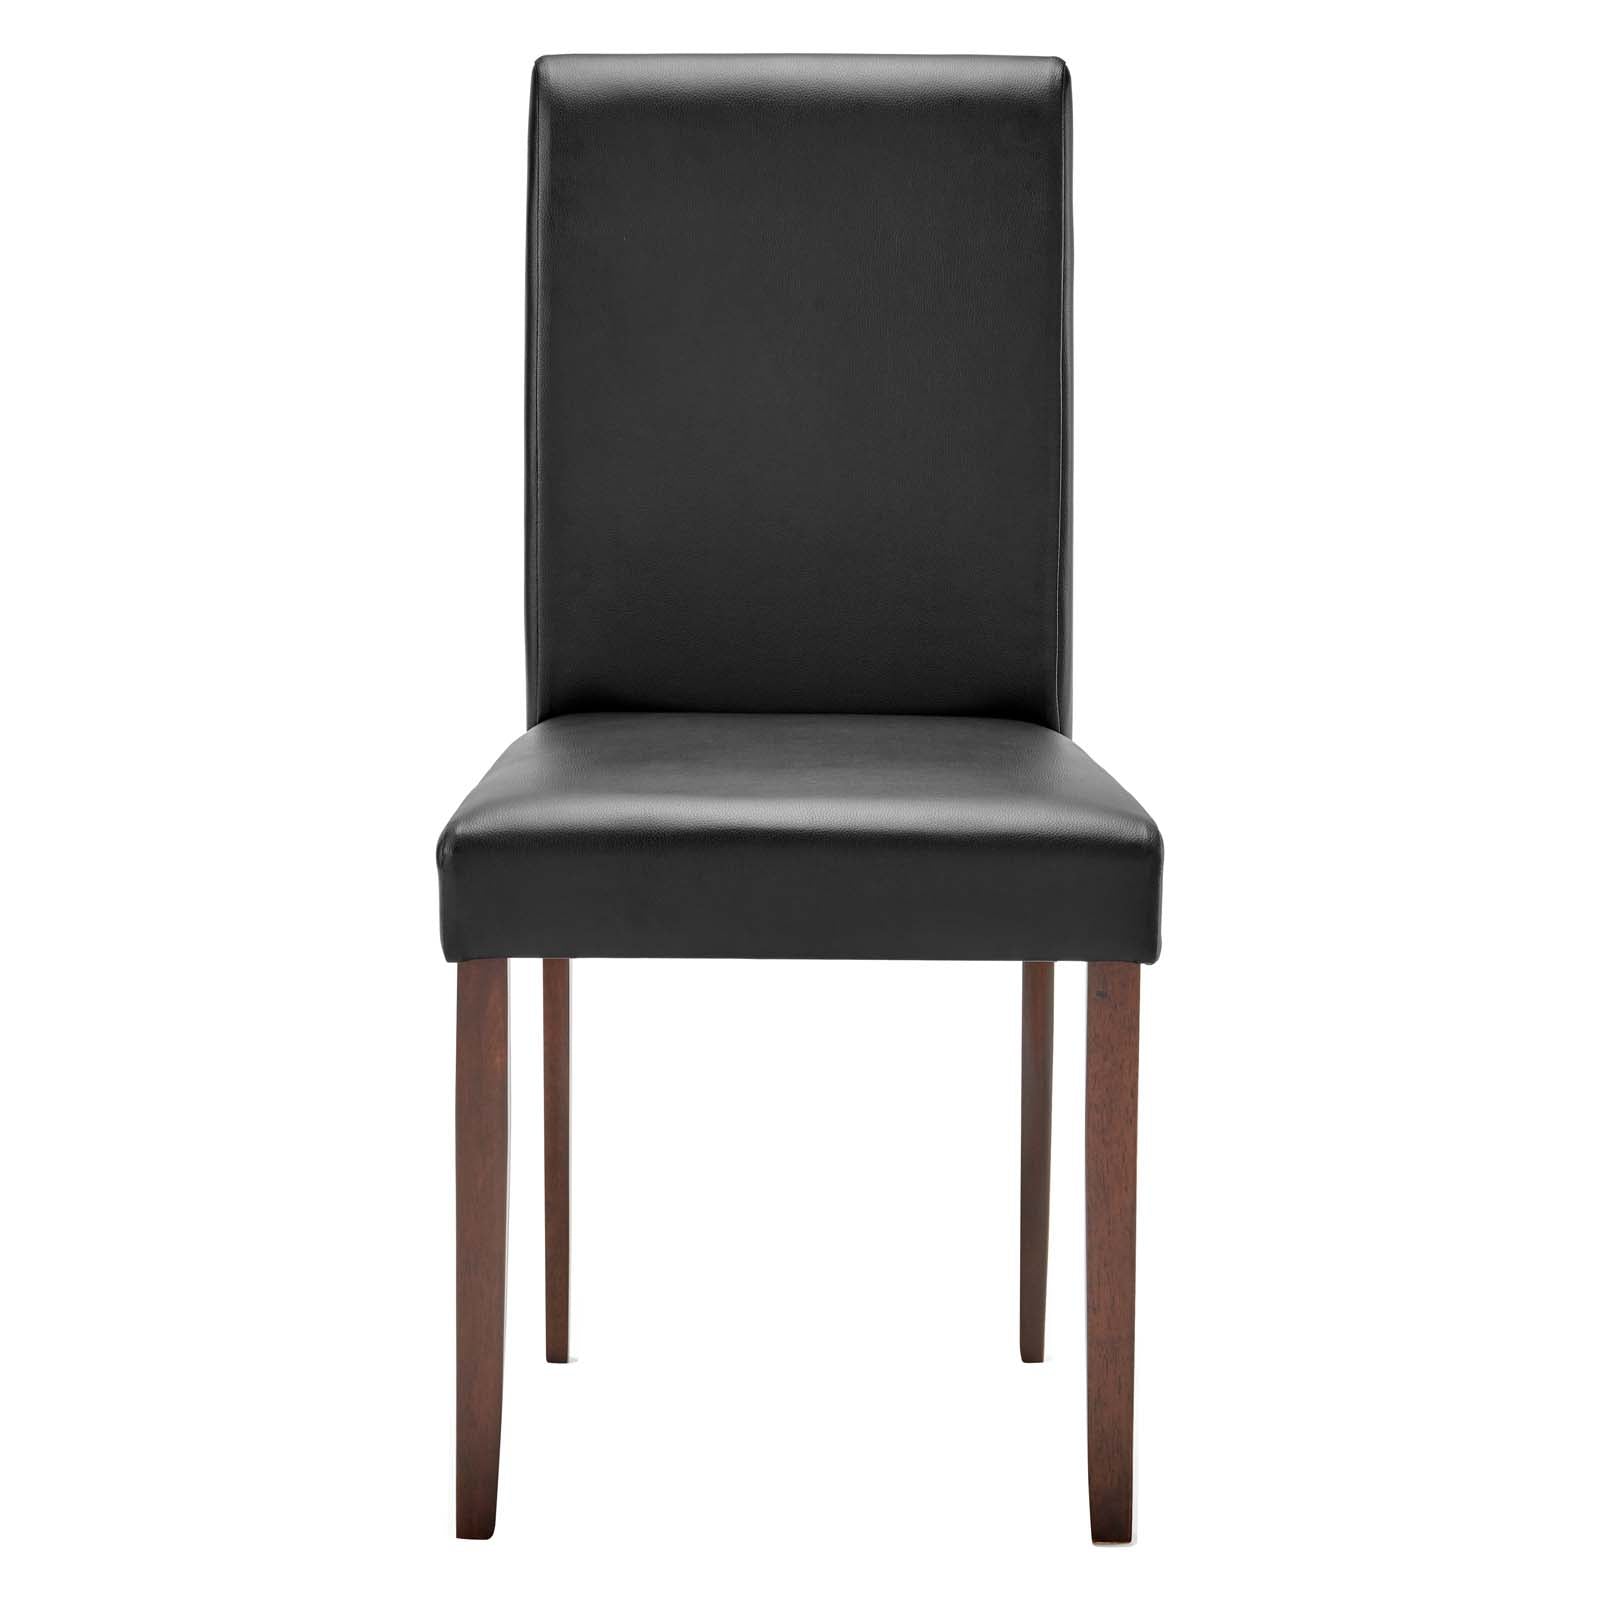 Prosper Faux Leather Dining Side Chair Set of 2 - East Shore Modern Home Furnishings